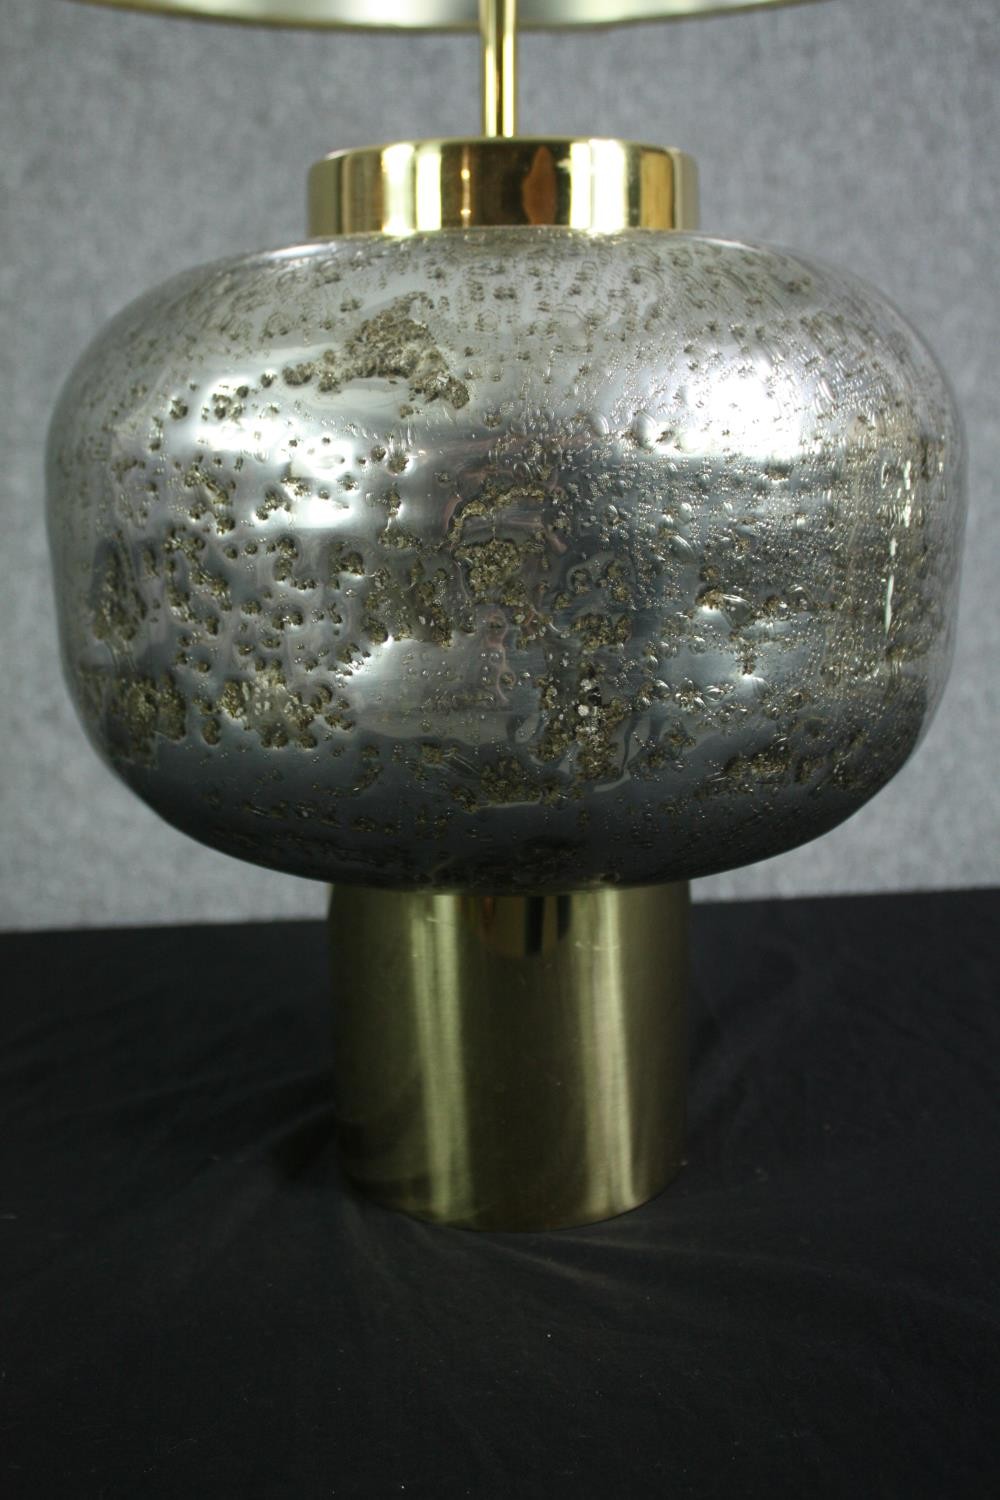 A modern designer table lamp. Brass and steel. With a distressed pitted finished and brass base. The - Image 5 of 5